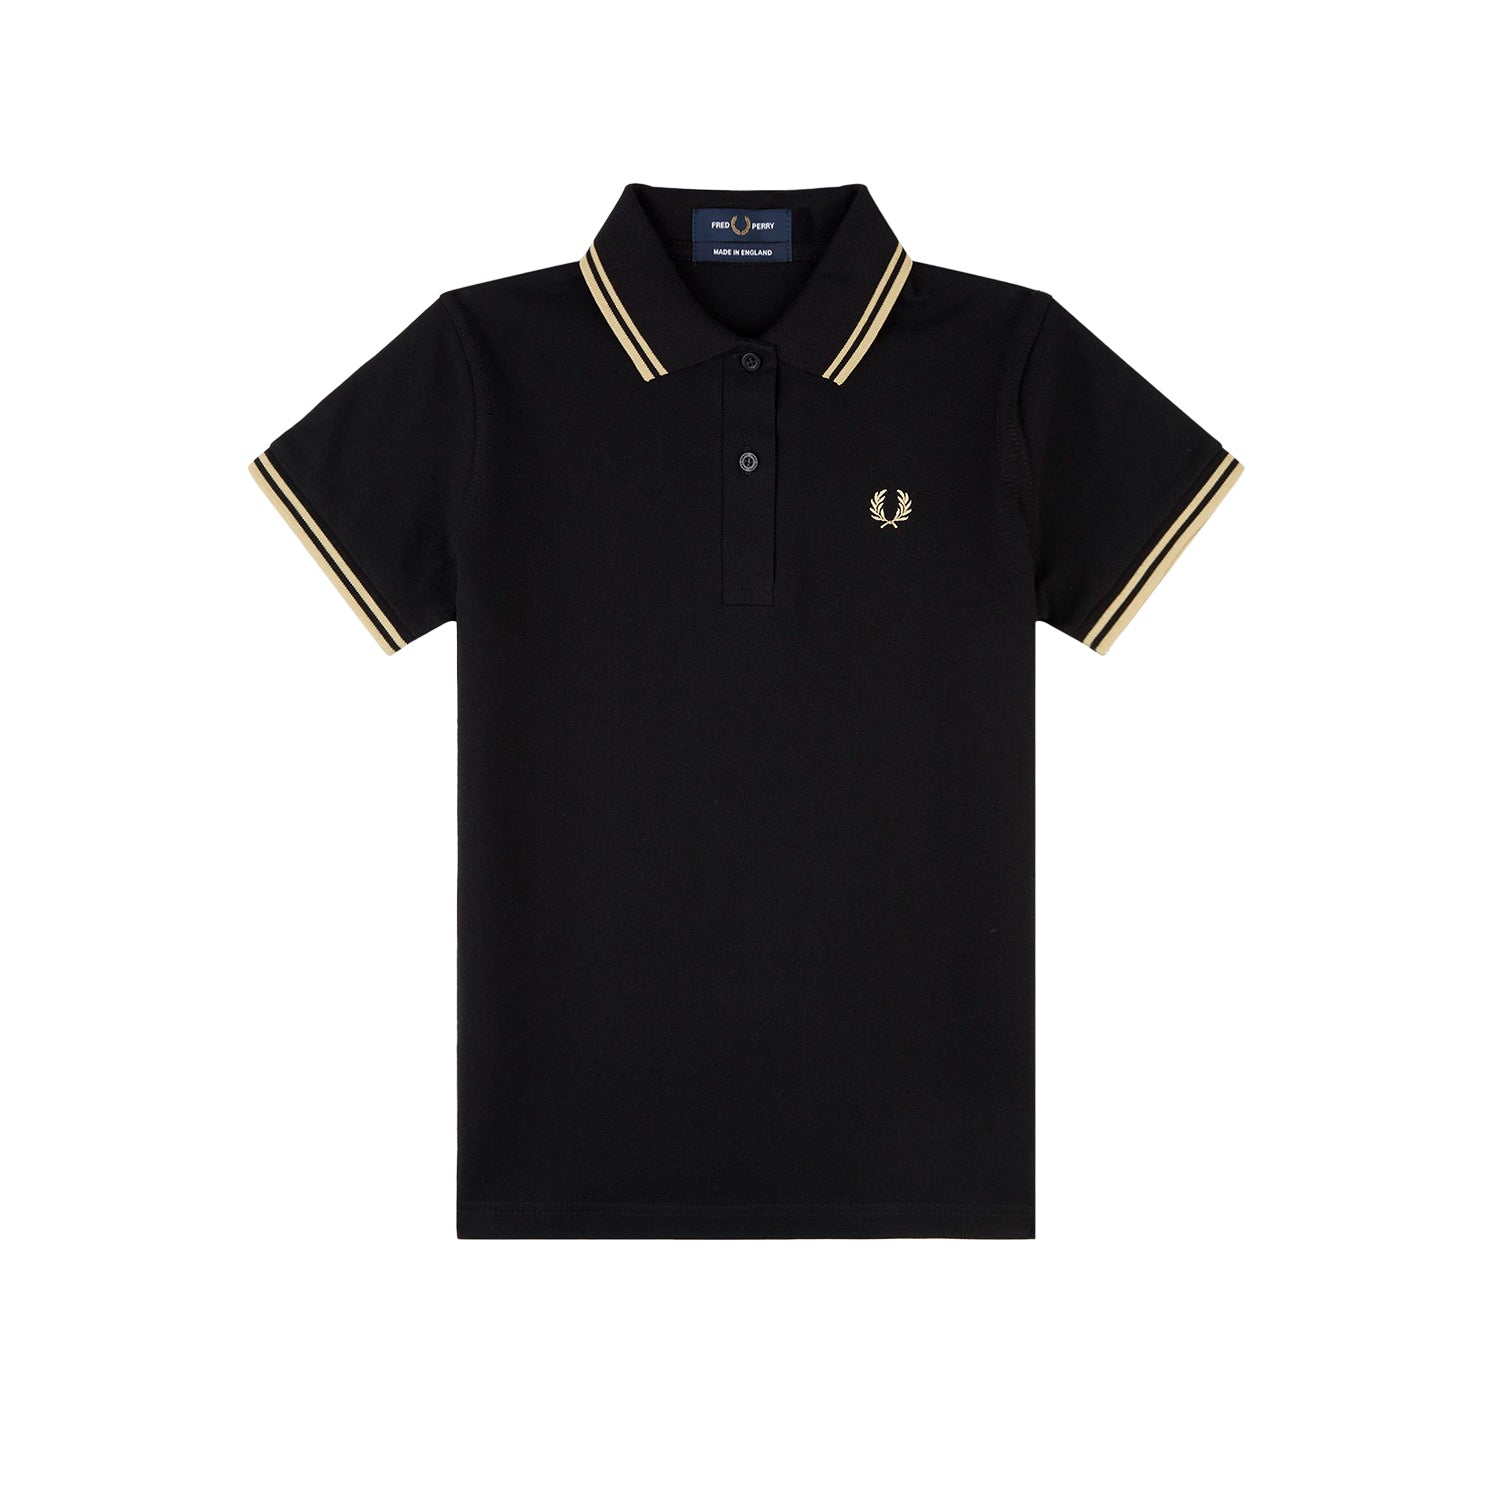 FRED PERRY G12 TWIN TIPPED SHIRT - BLACK/CHAMPAGNE – Prime